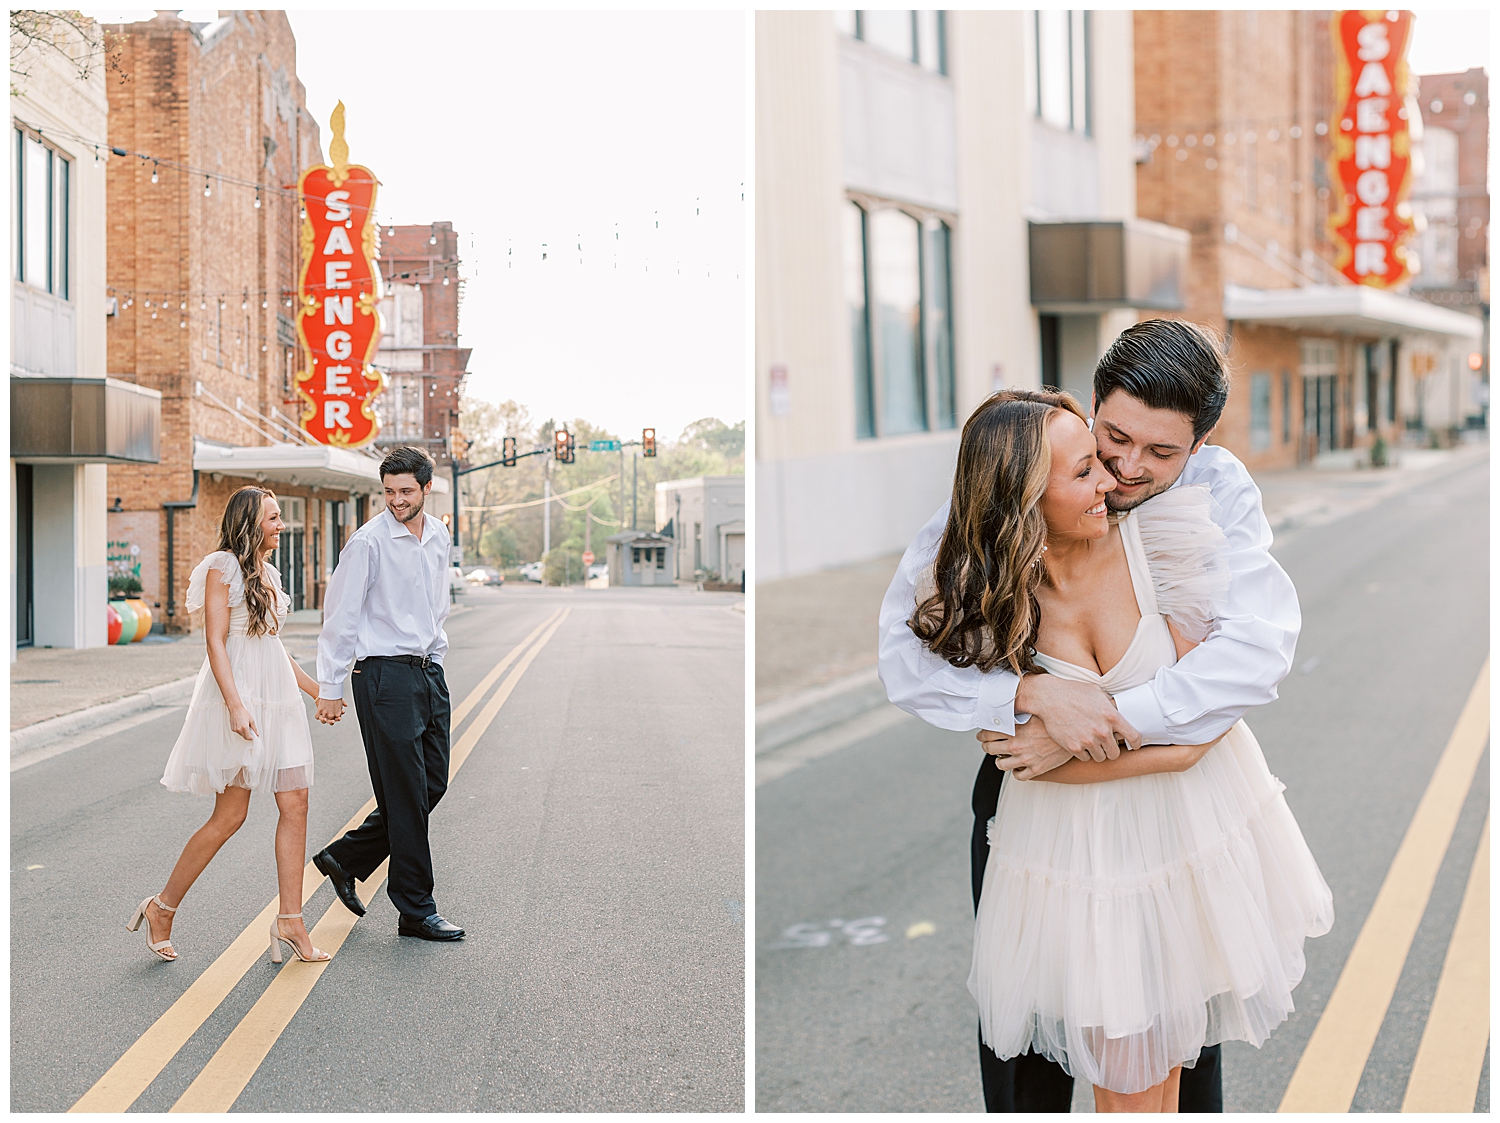 A couple walks the streets of downtown for their spring engagement photos.